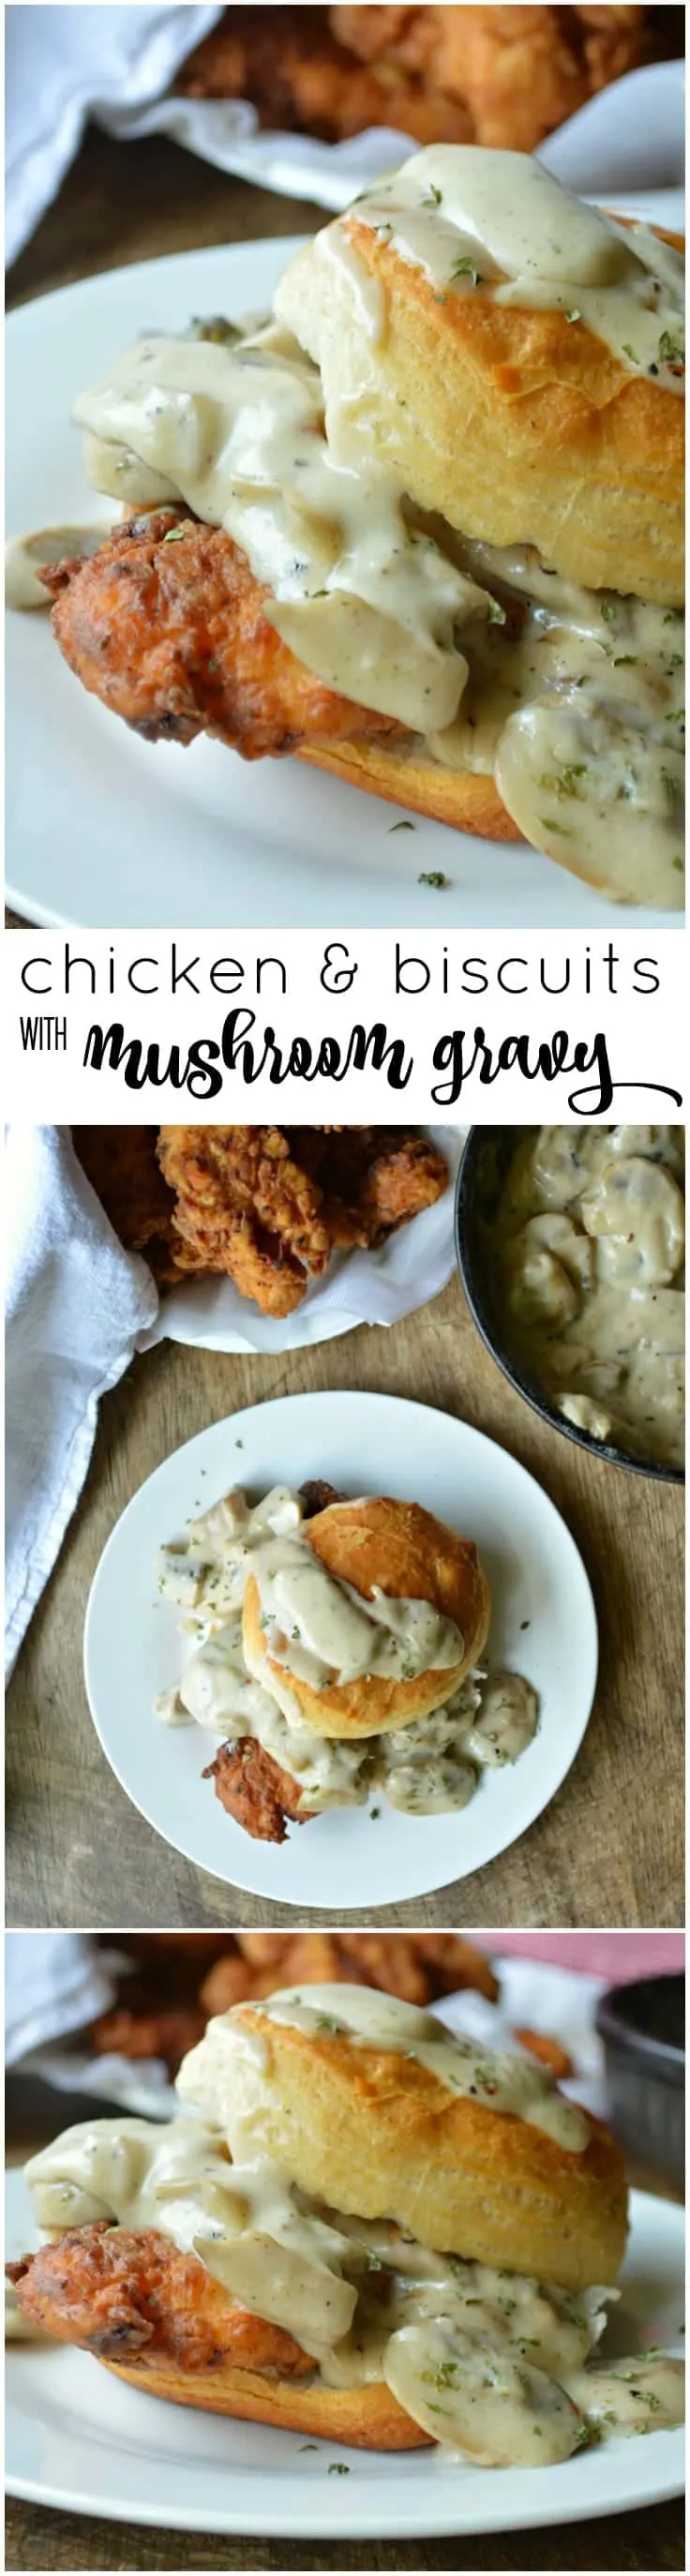 Easy Chicken and Biscuits with Mushroom Gravy is perfect for a hearty breakfast or a quick weeknight meal!